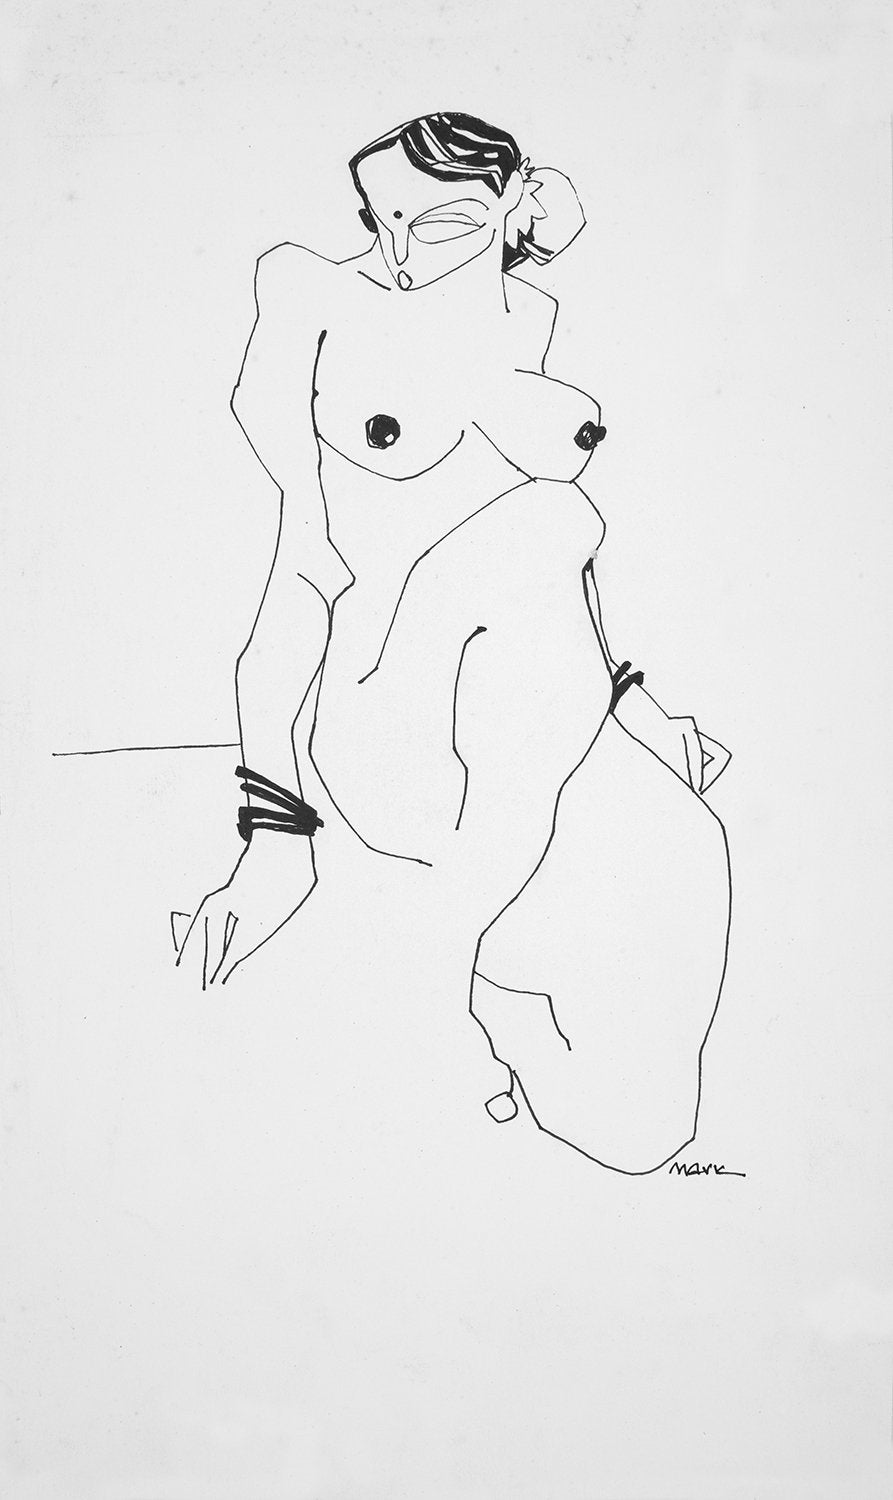 Nude 44|S. Mark Rathinaraj- Pen and Ink on Paper, , 14 x 8.5 inches